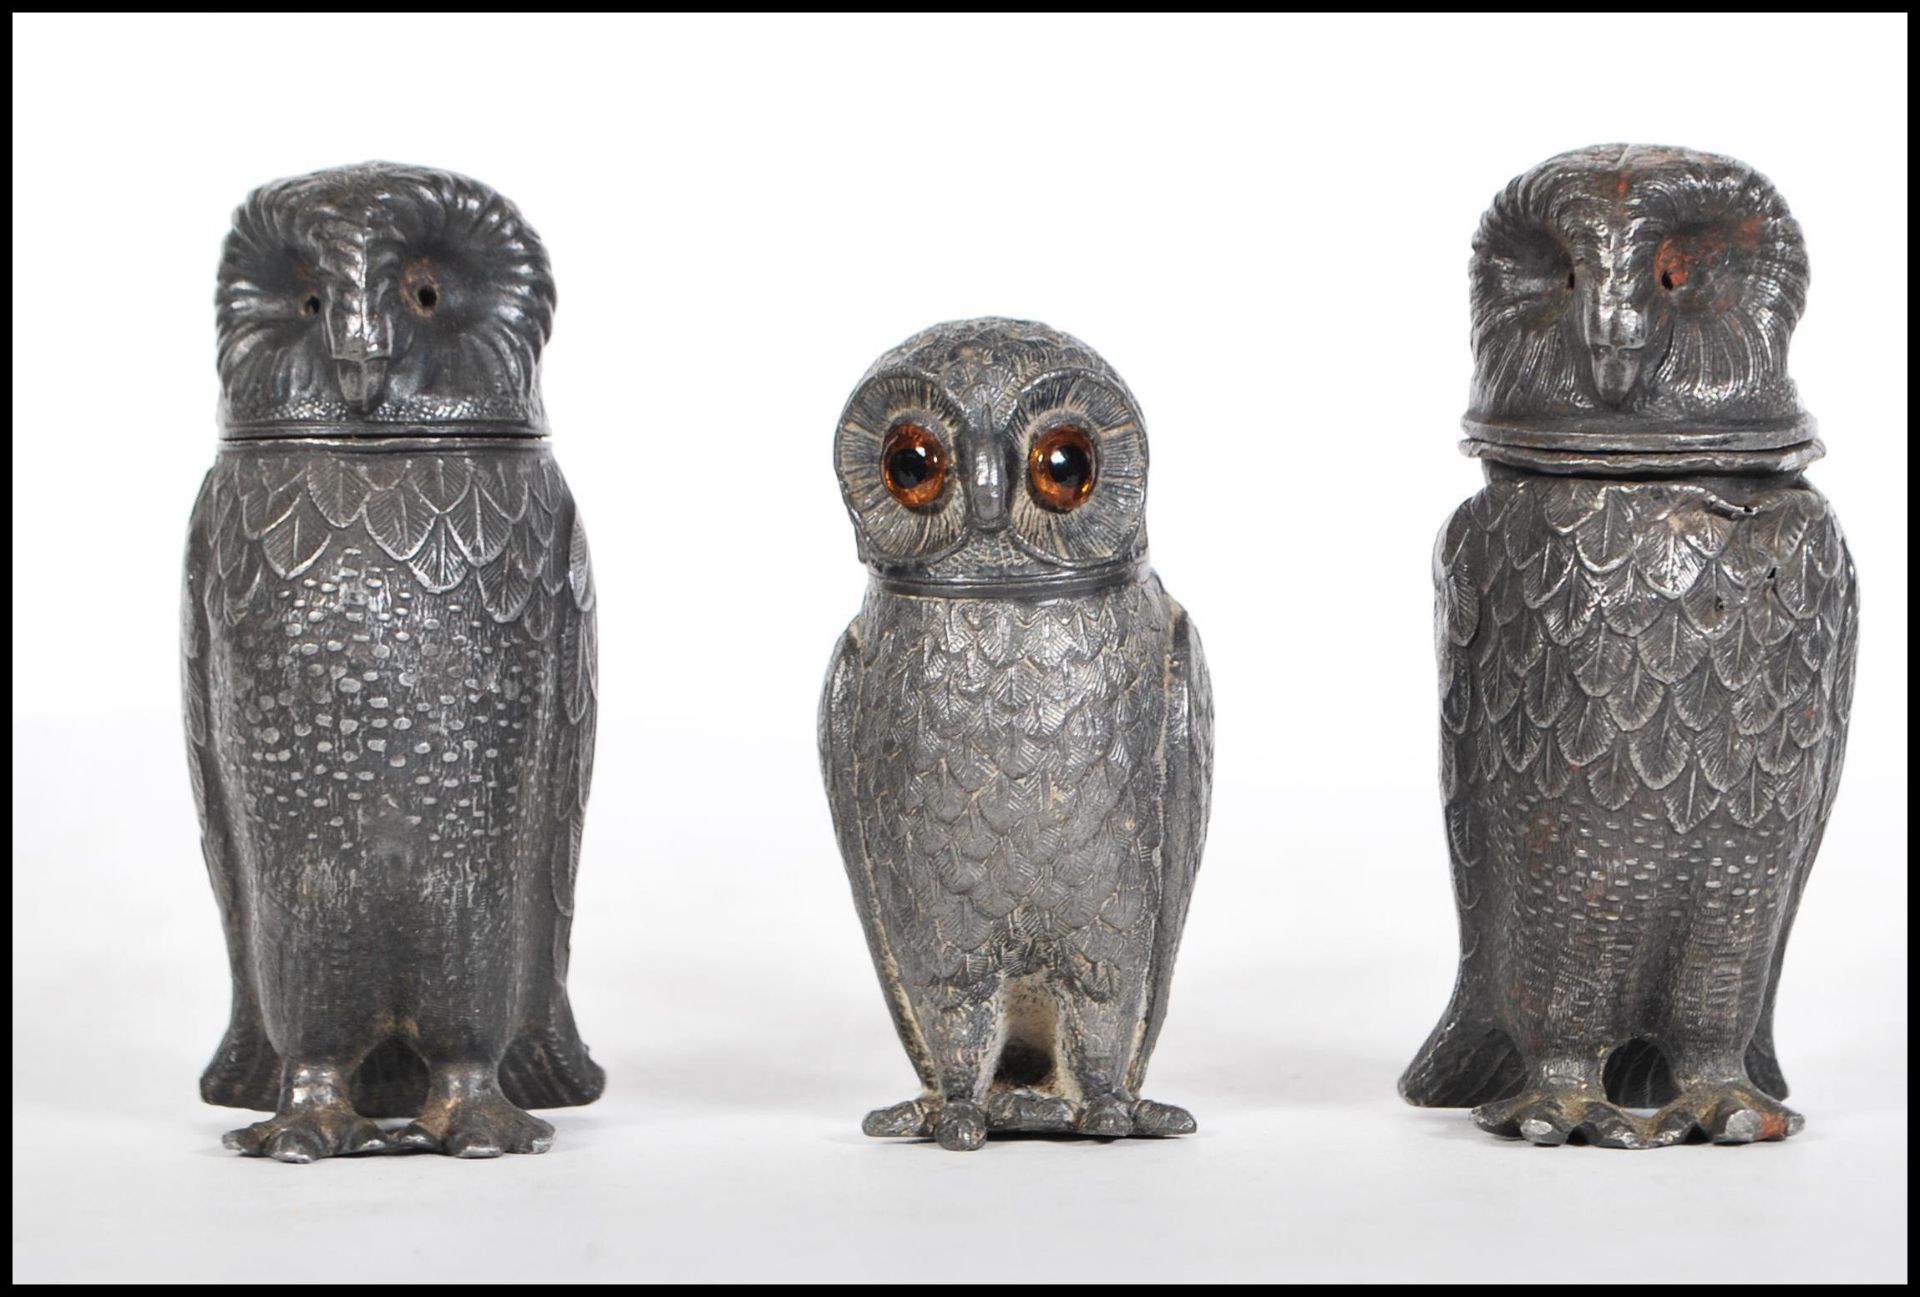 A pair of 19th Century French pewter pepperette condiments in the form of owls, along with another